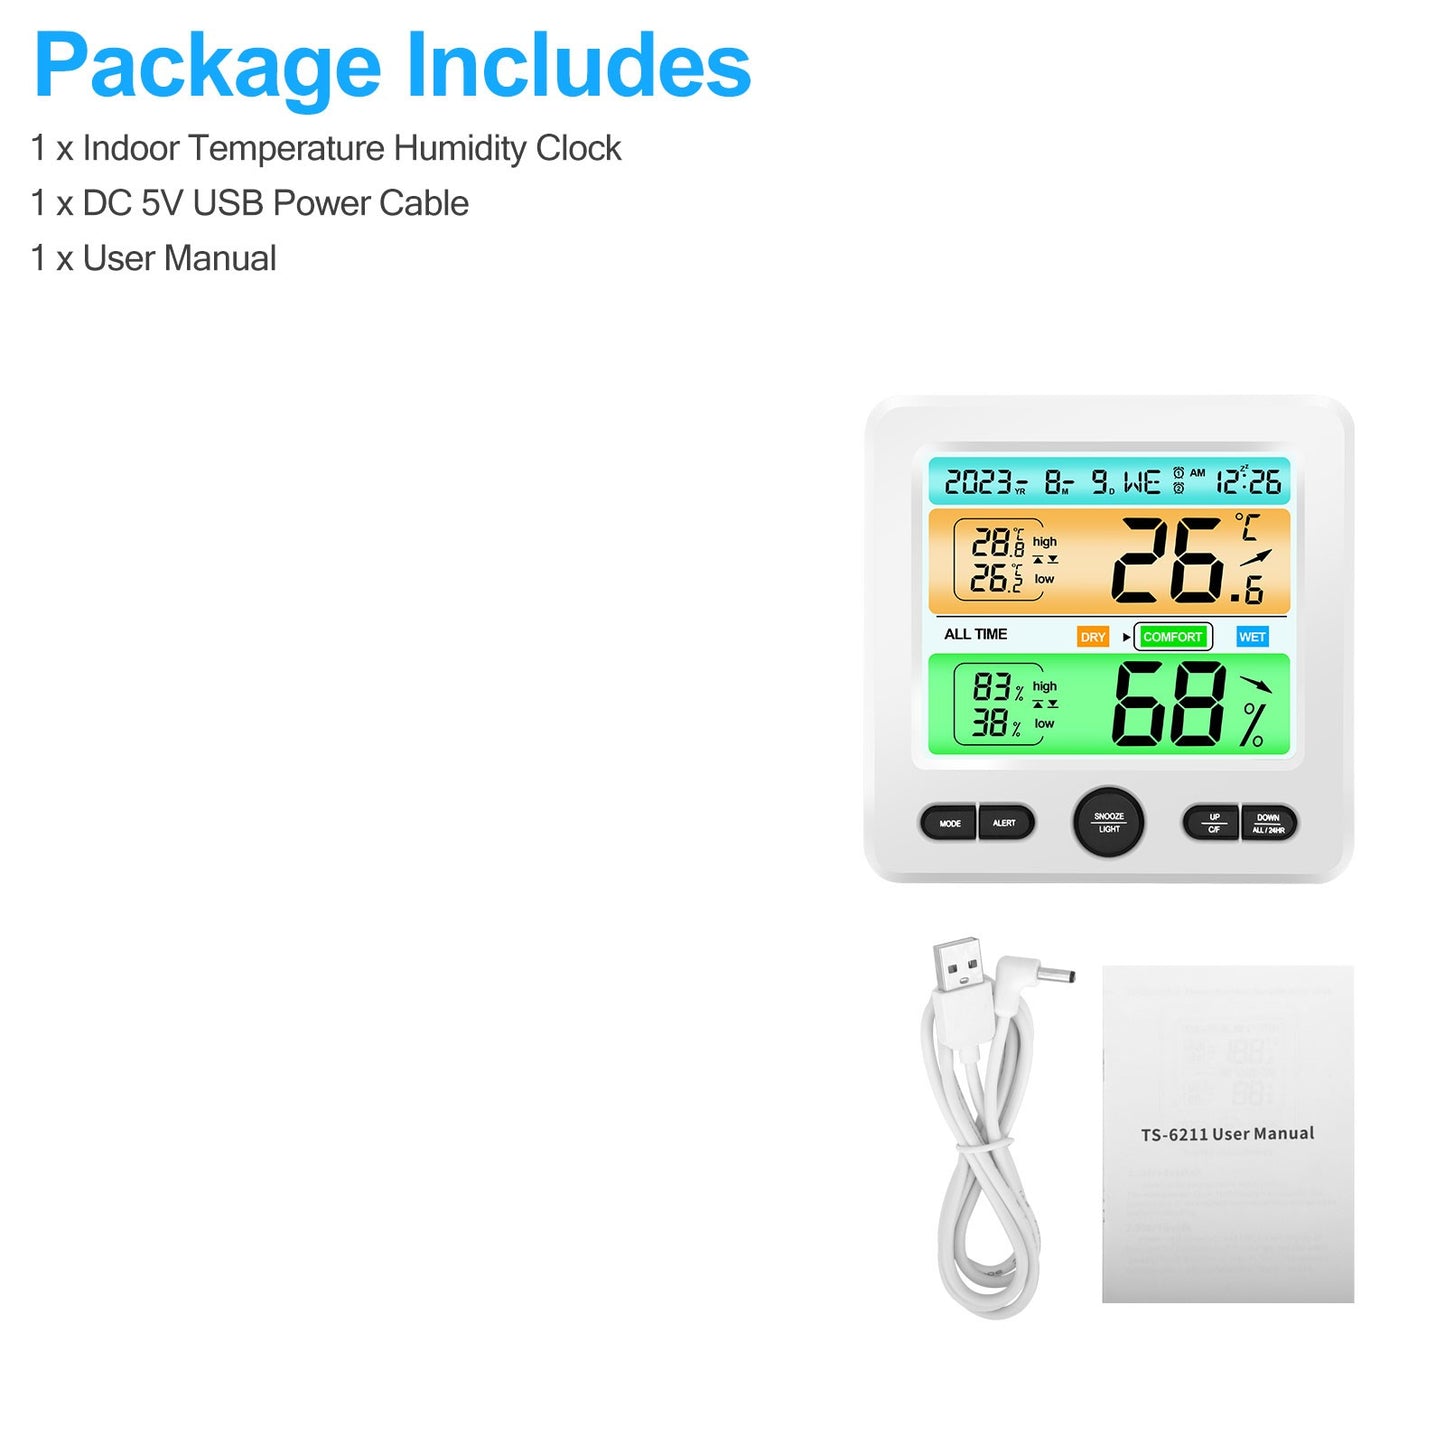 LCD Display Wall-mounted Desktop Indoor Humidity Temperature Meter - All in One Alarm Clock Thermometer Hygrometer Digital Thermometer Hygrometer (White)